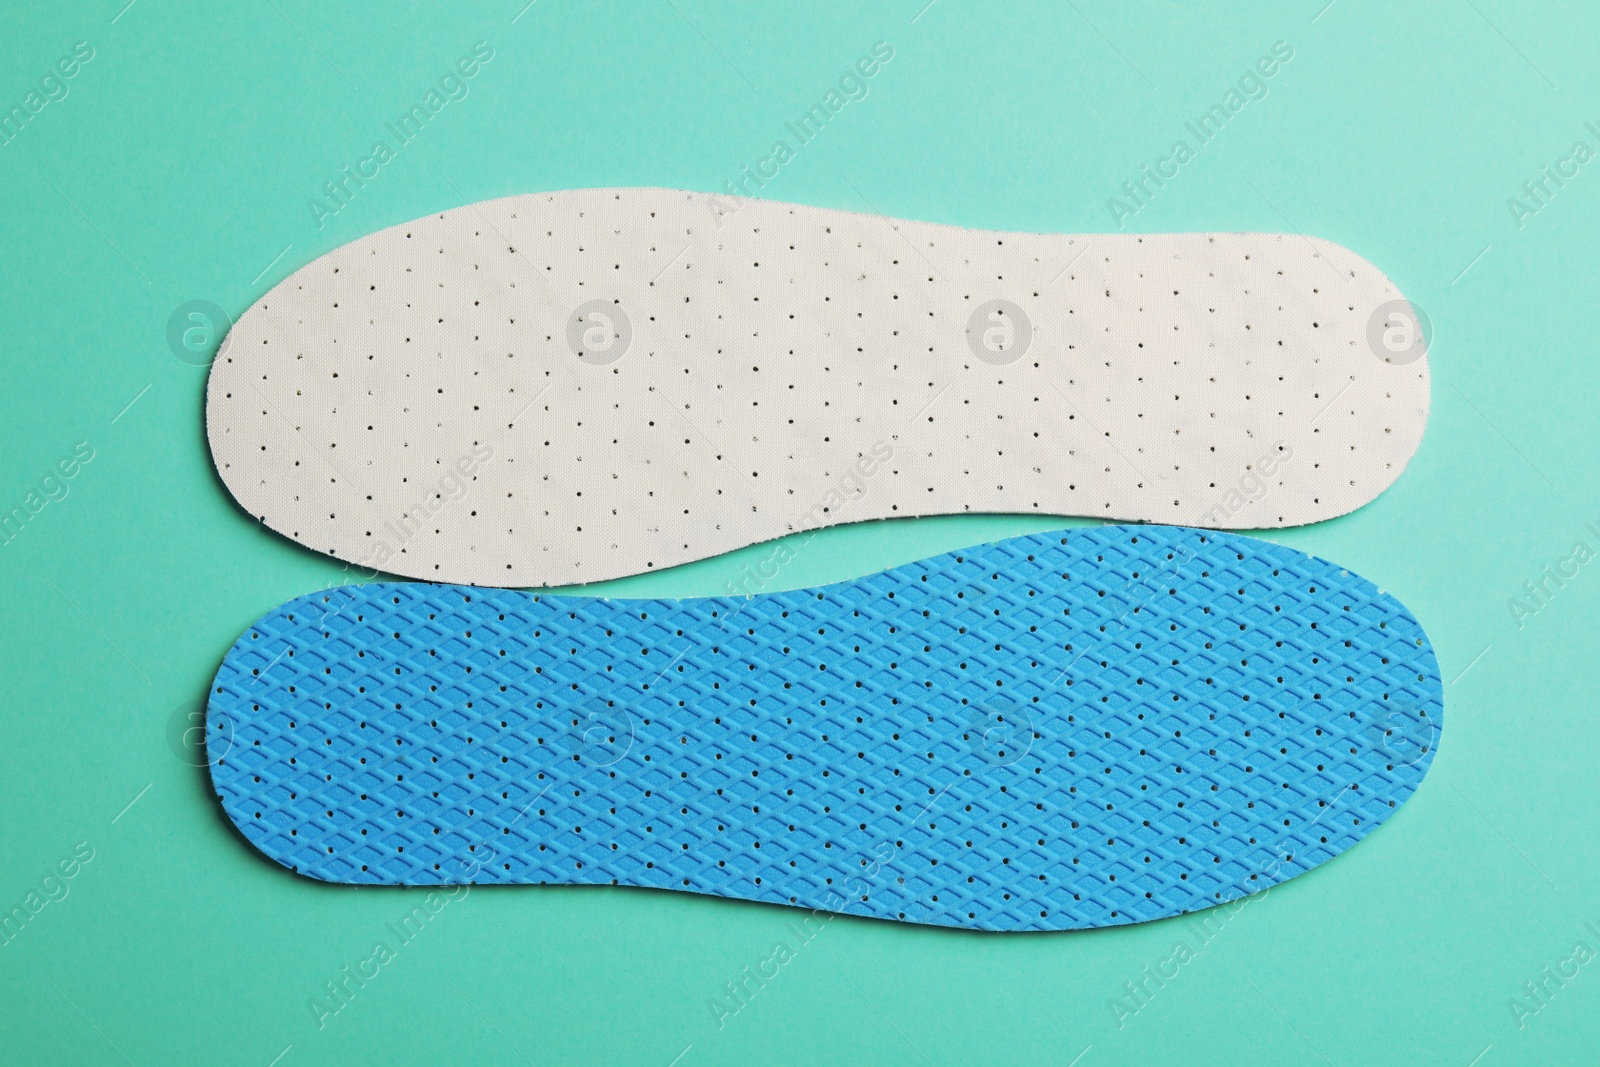 Photo of Pair of breathable shoe insoles on turquoise background, flat lay